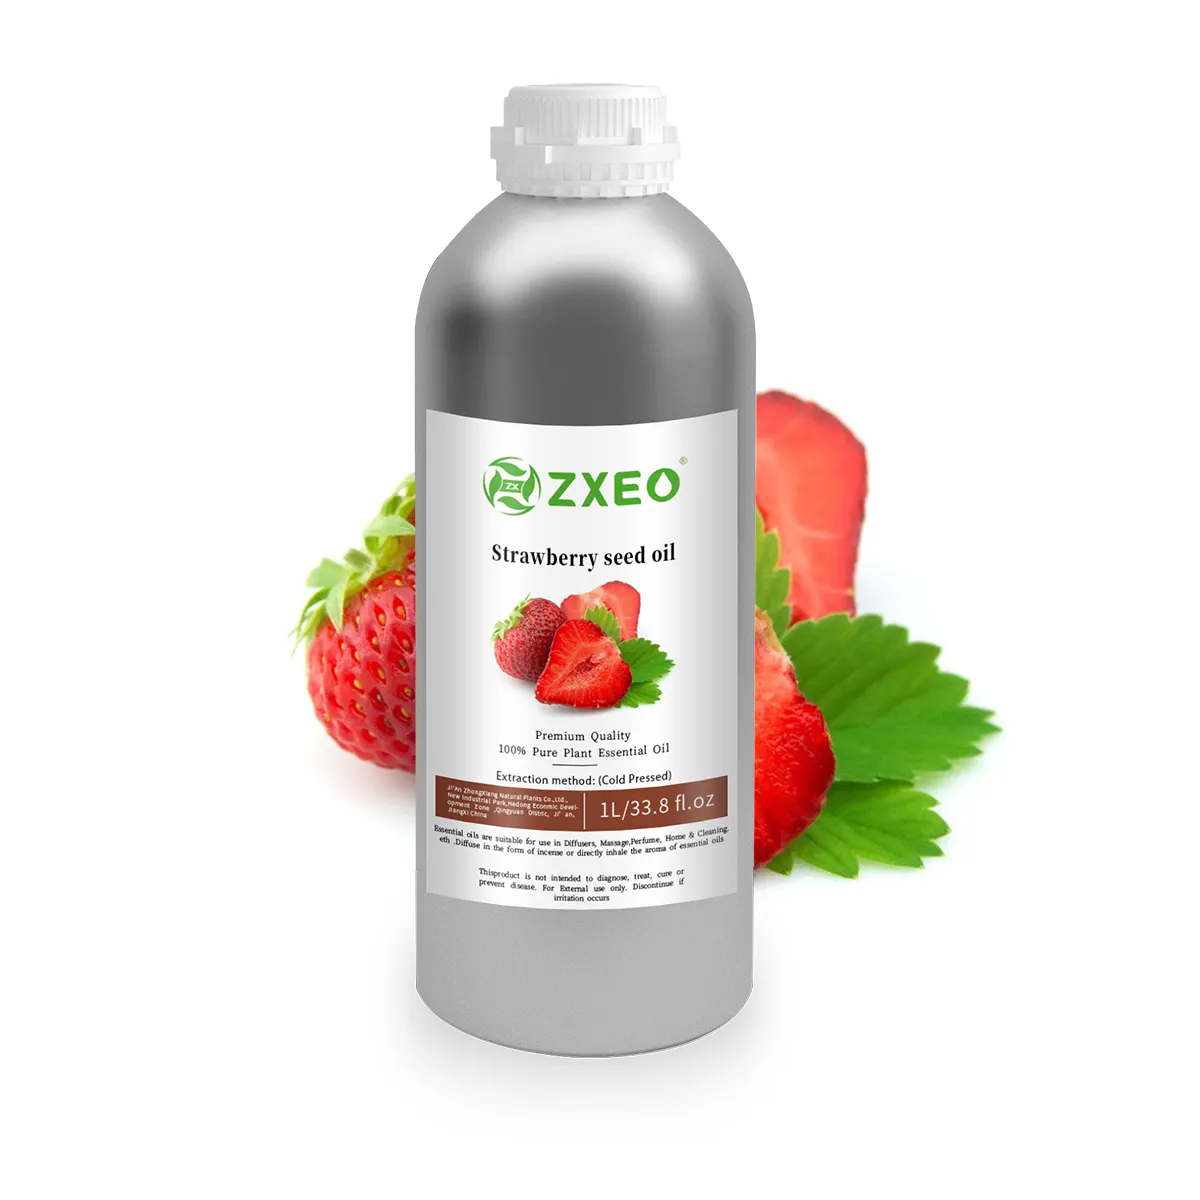 Organic strawberry oil global supplier or exporter Best Quality Organic Strawberry Seed Oil Available for Bulk Purchase